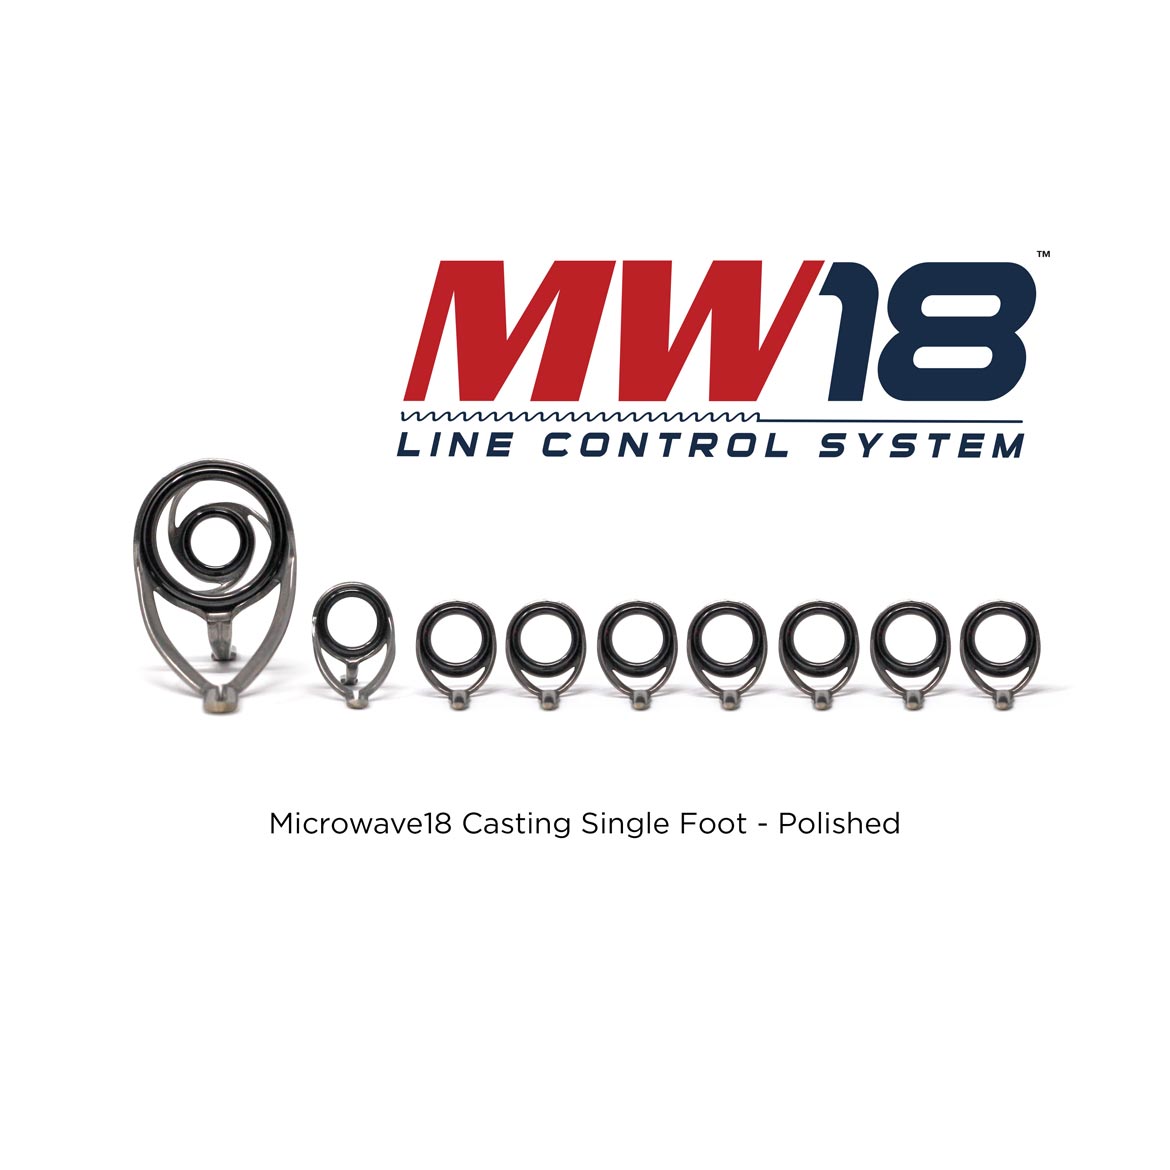 MicroWave 18 Line Control System